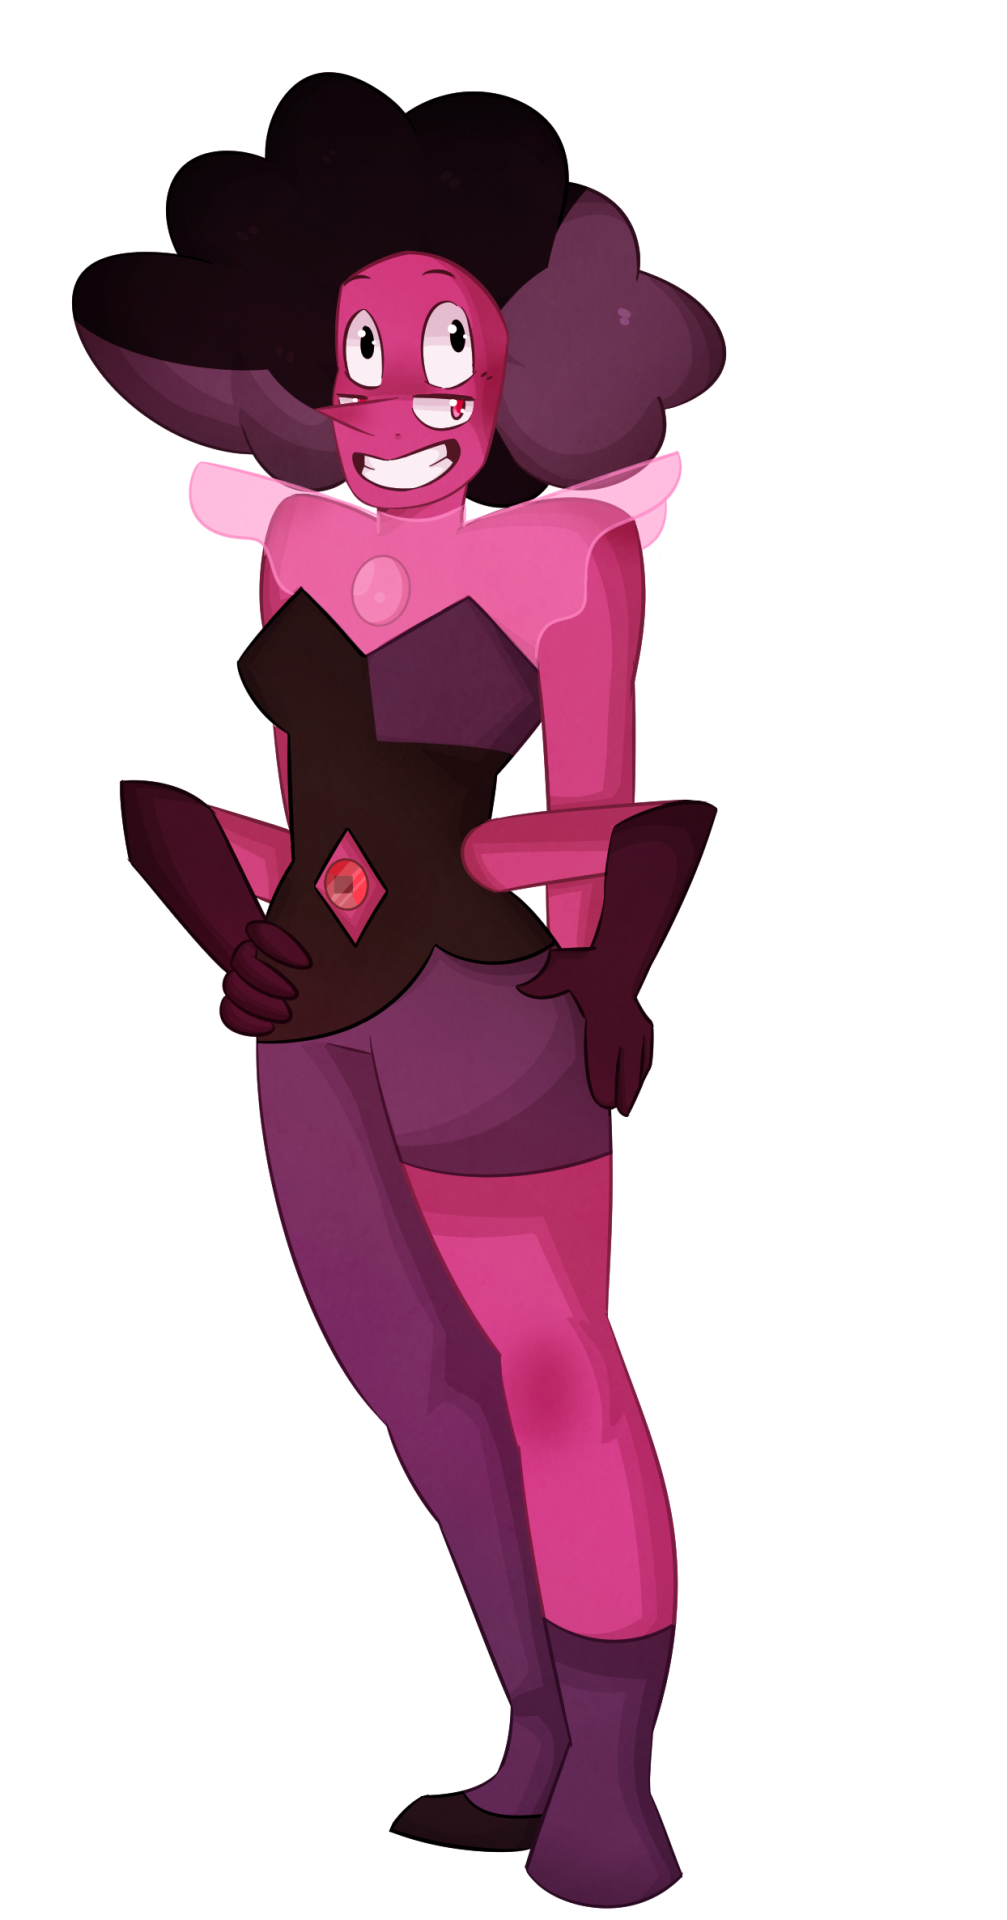 out of all the gems that have been introduced, rhodonite is my fav